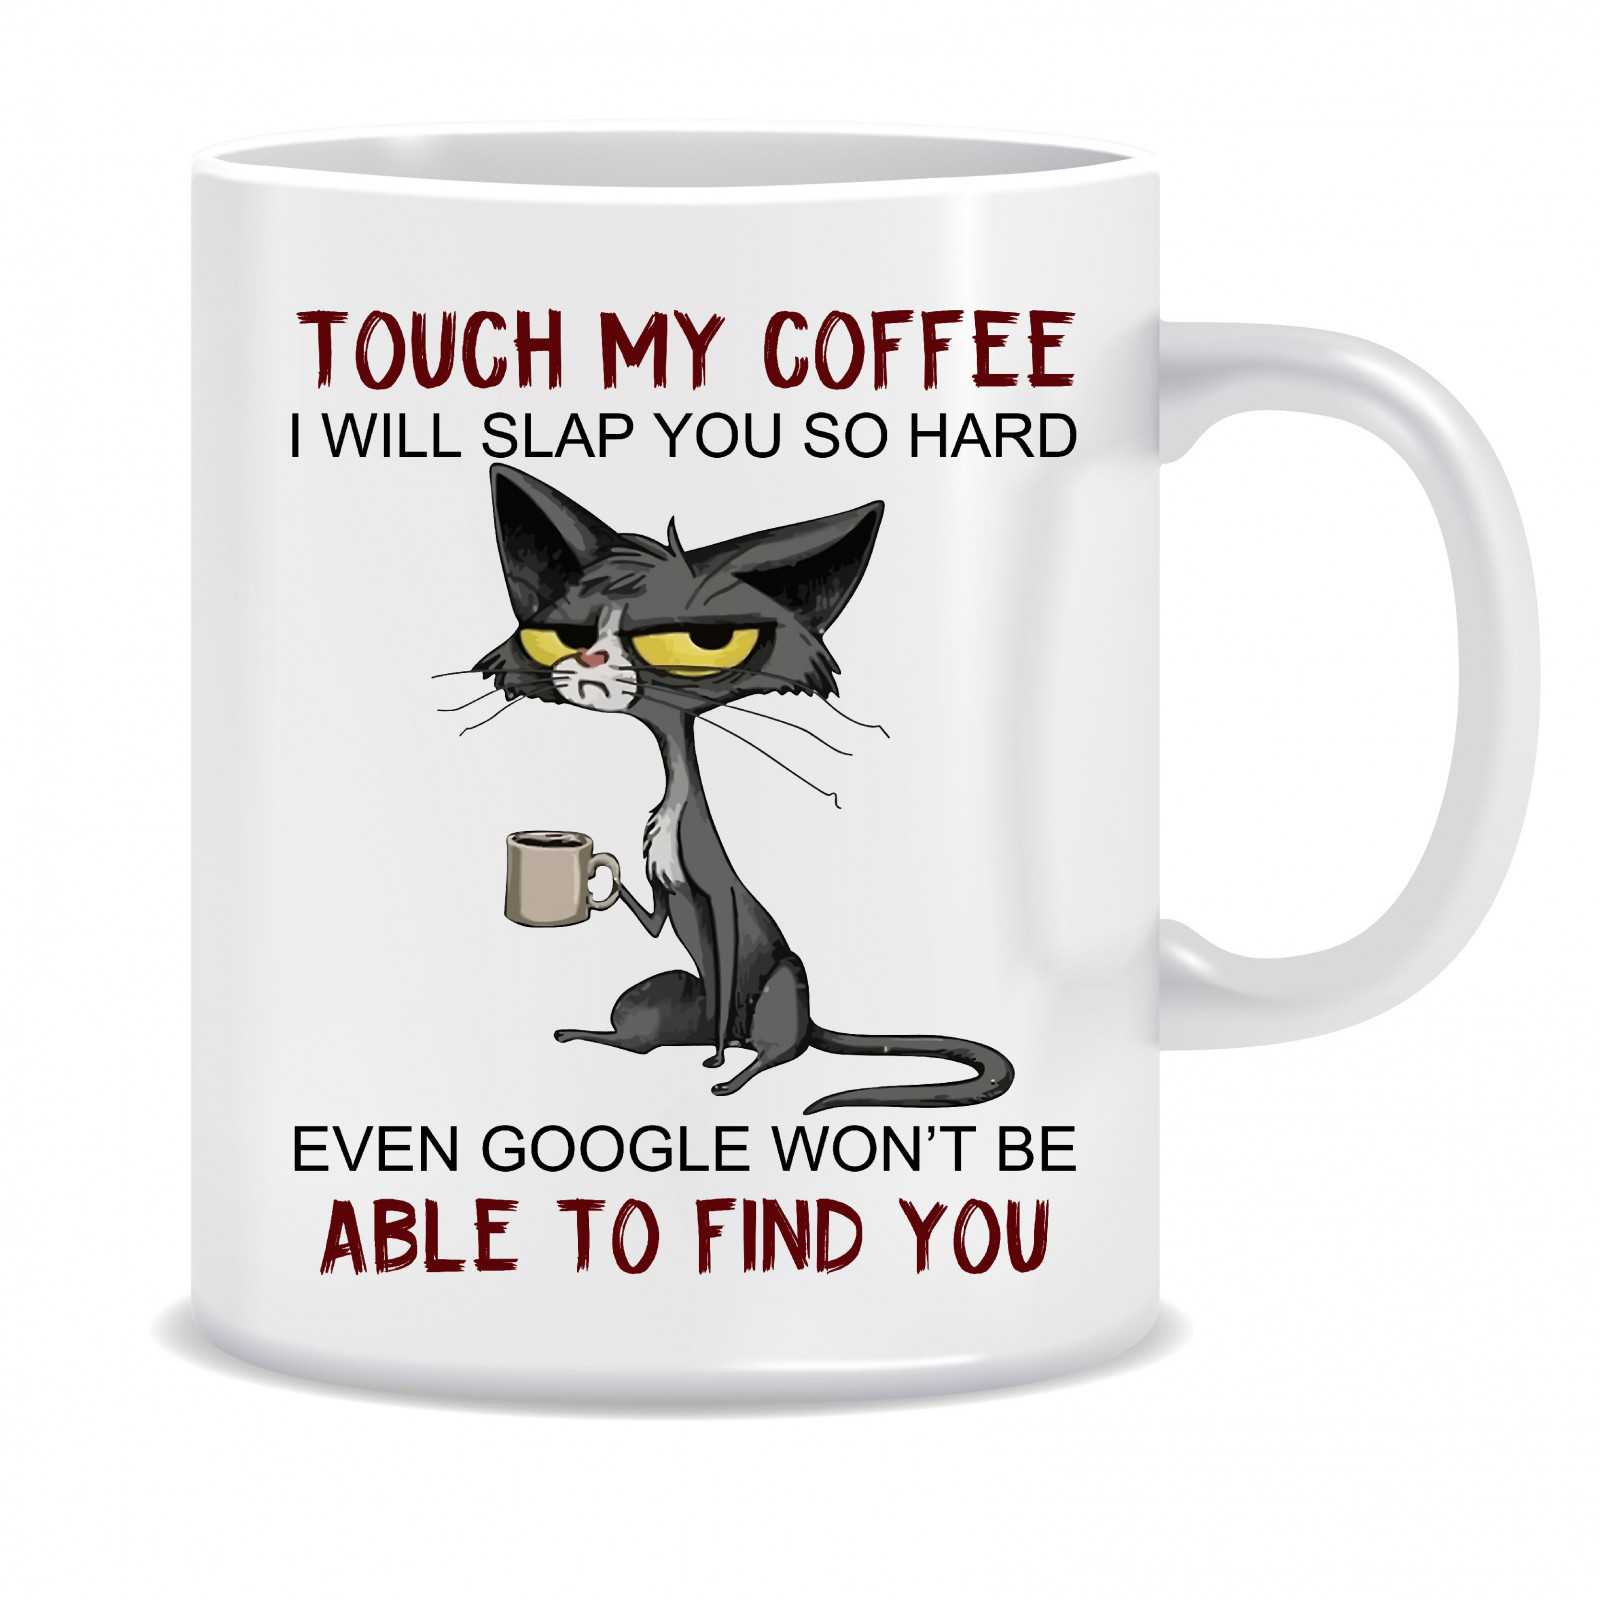 Kubek z kotem (Touch my coffee, won't be able to find you) - mitzu.pl